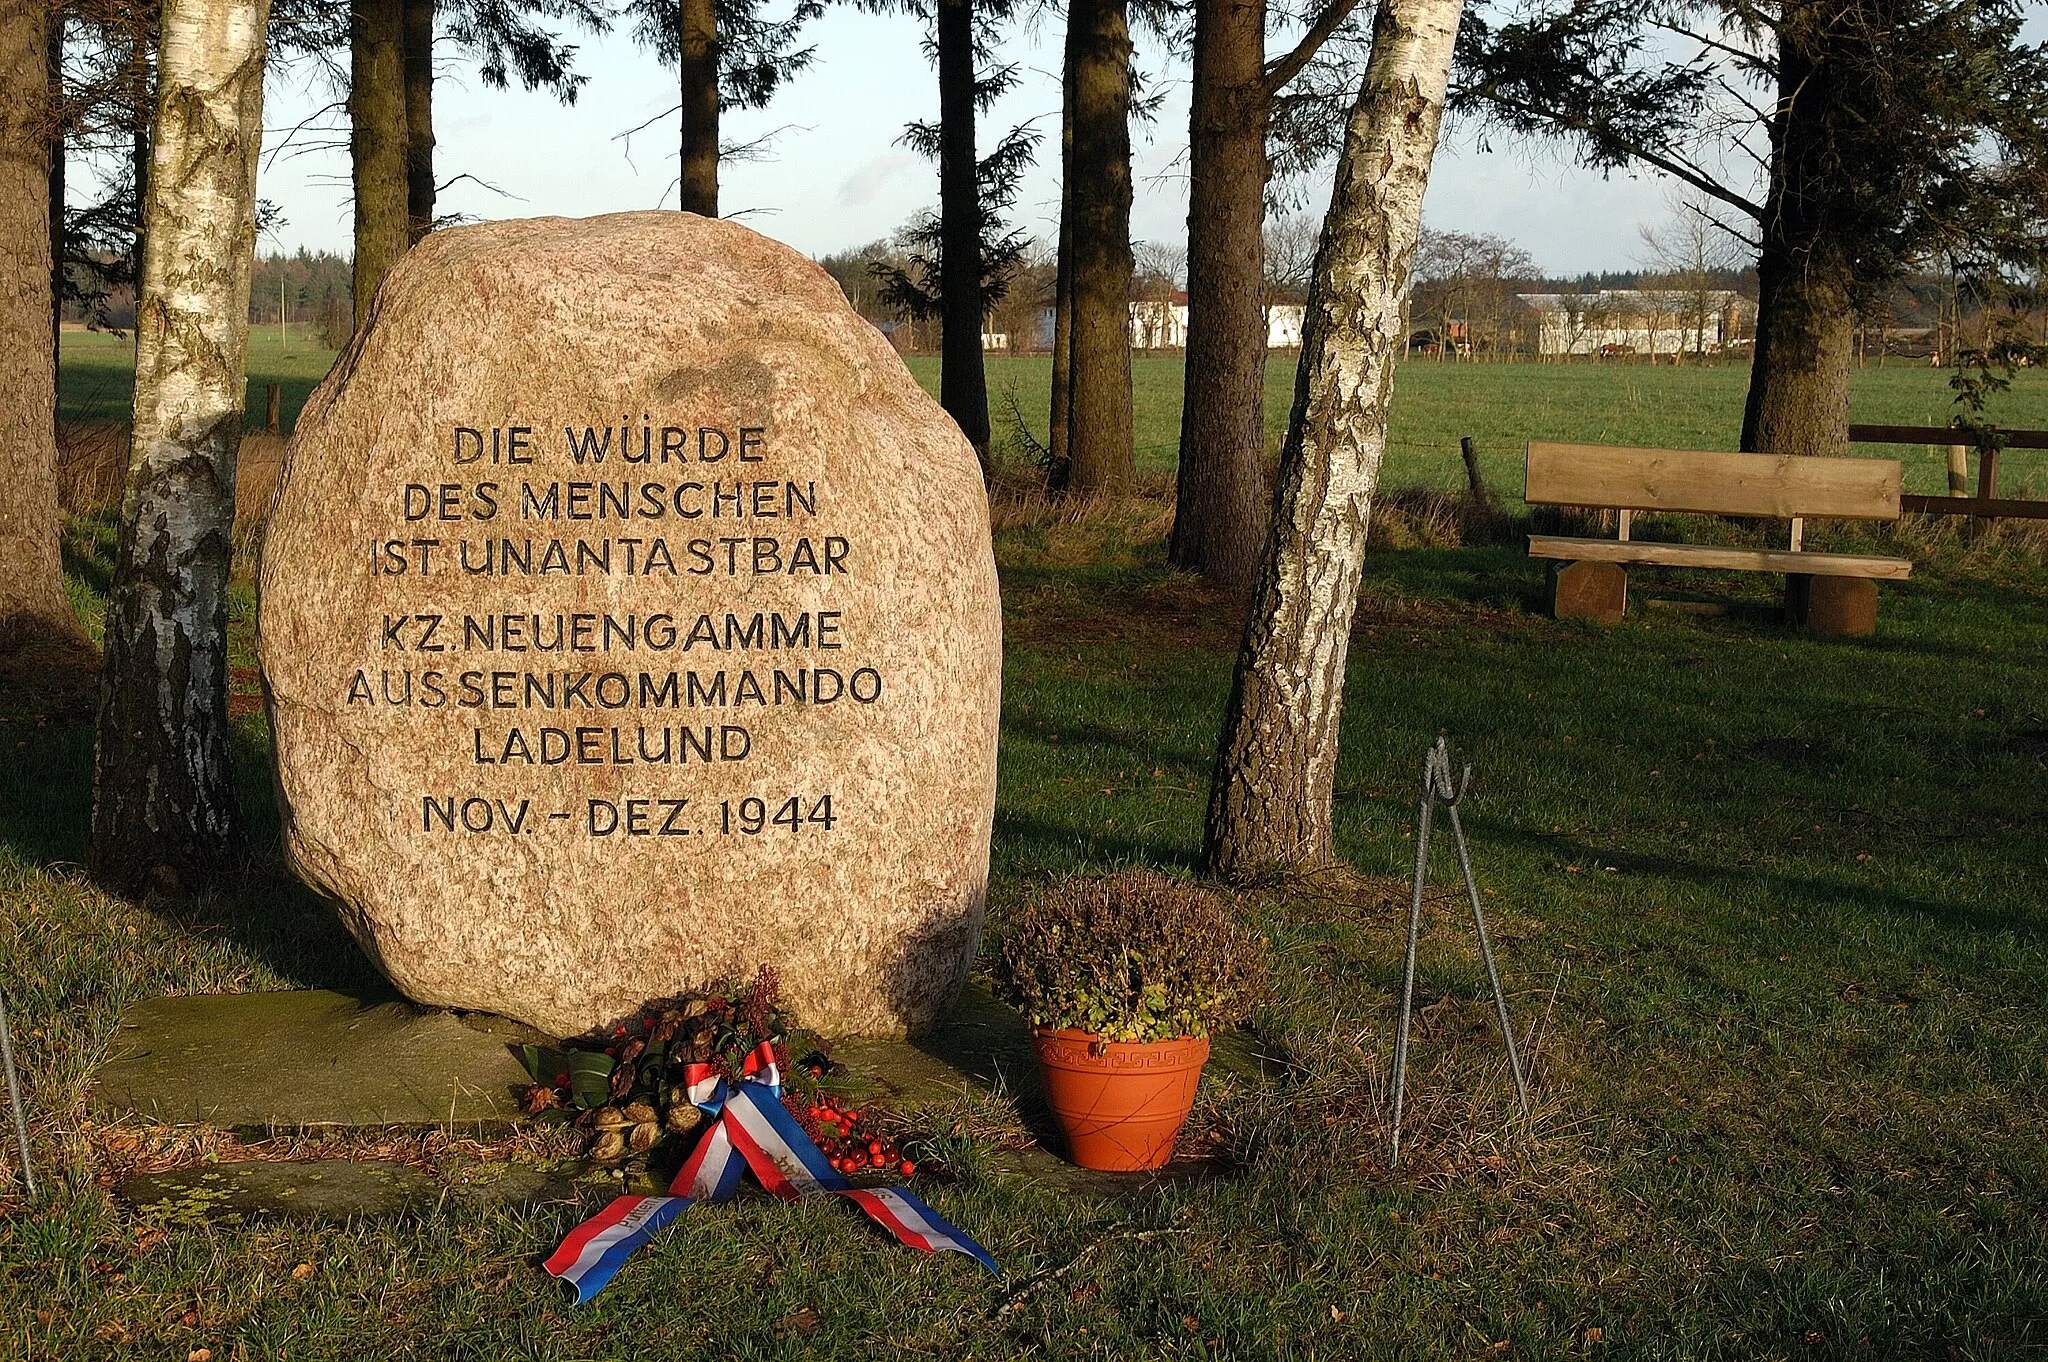 Photo showing: Memorial at the former concentration camp Ladelund, Germany